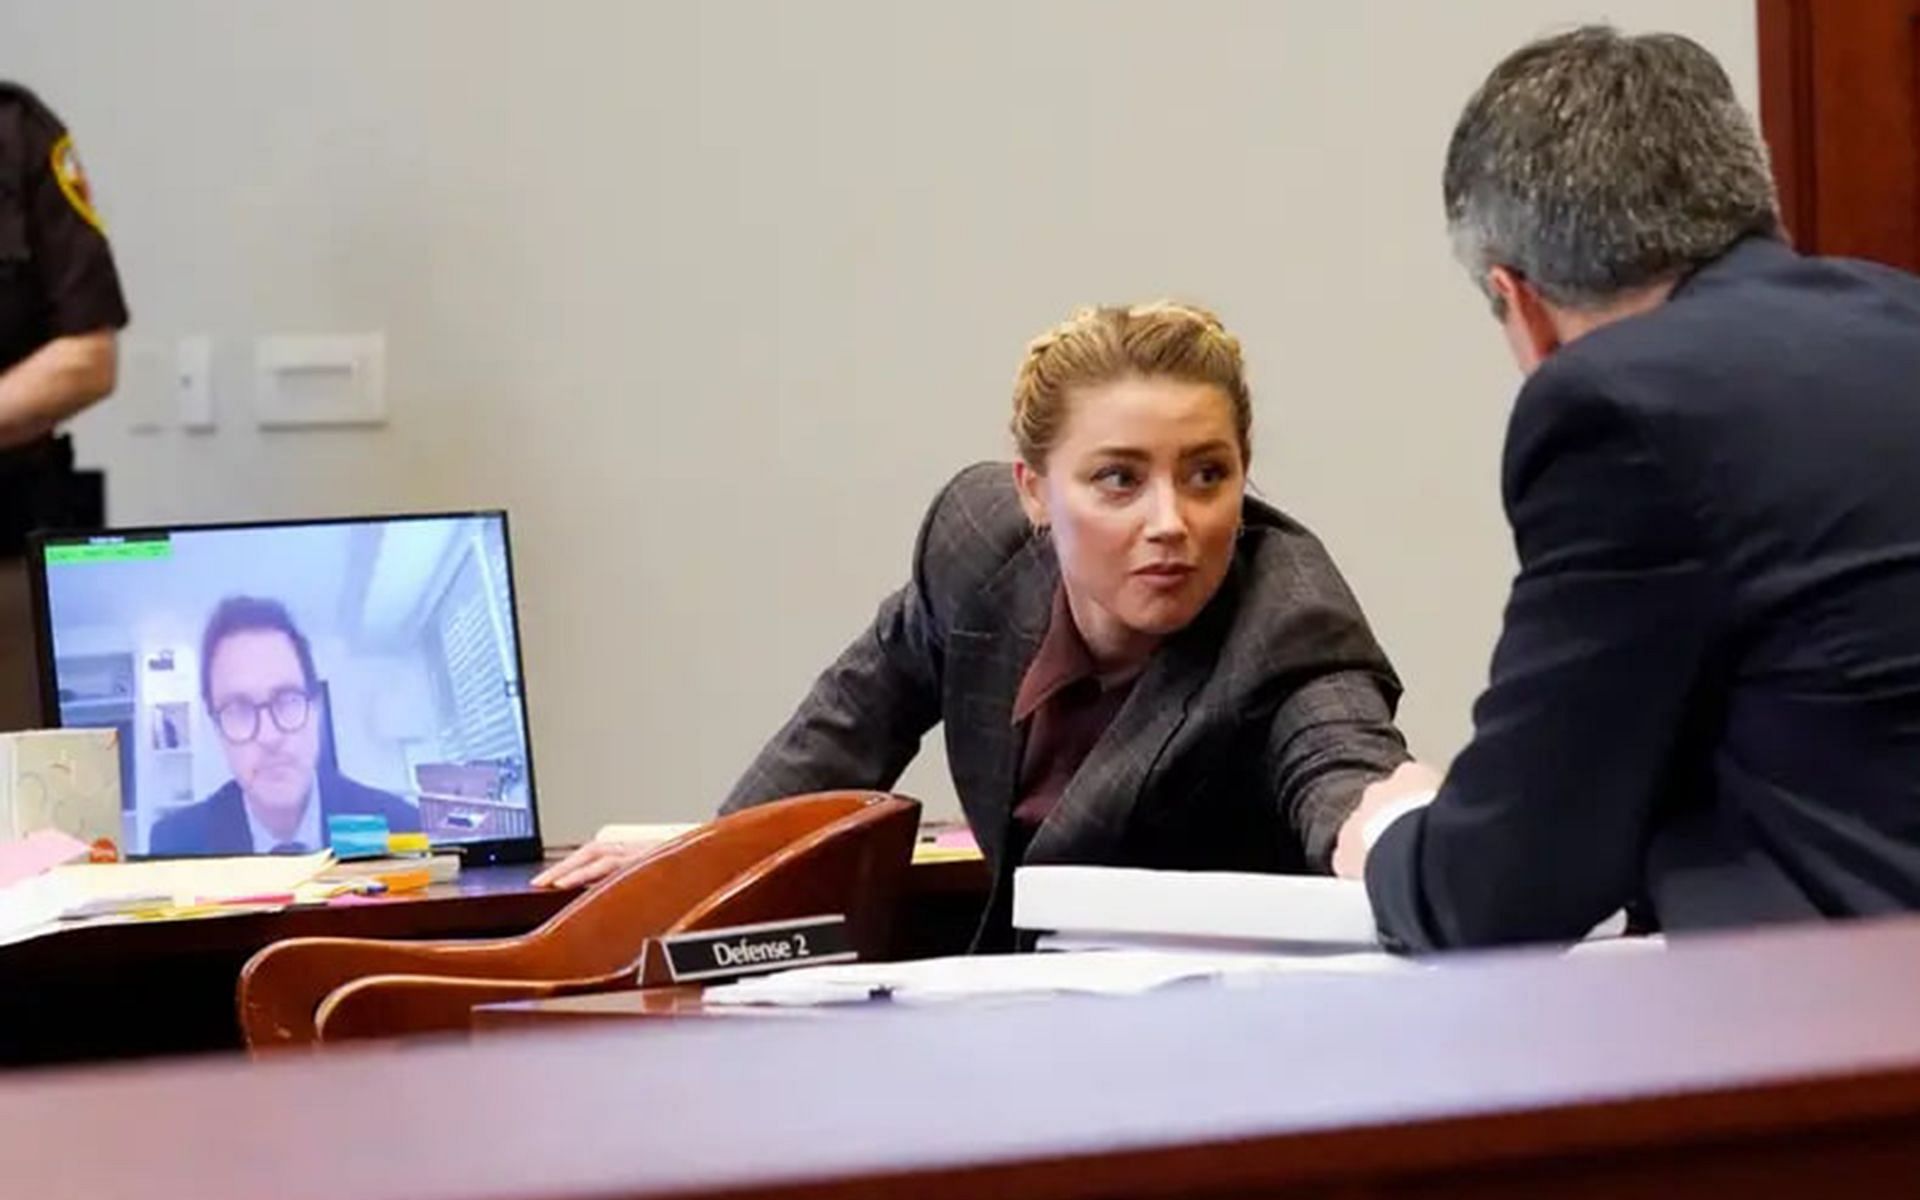 Jack Whigham seen on a monitor while Heard talks to her lawyer (Image by Steve Helber/ Pool via REUTERS)